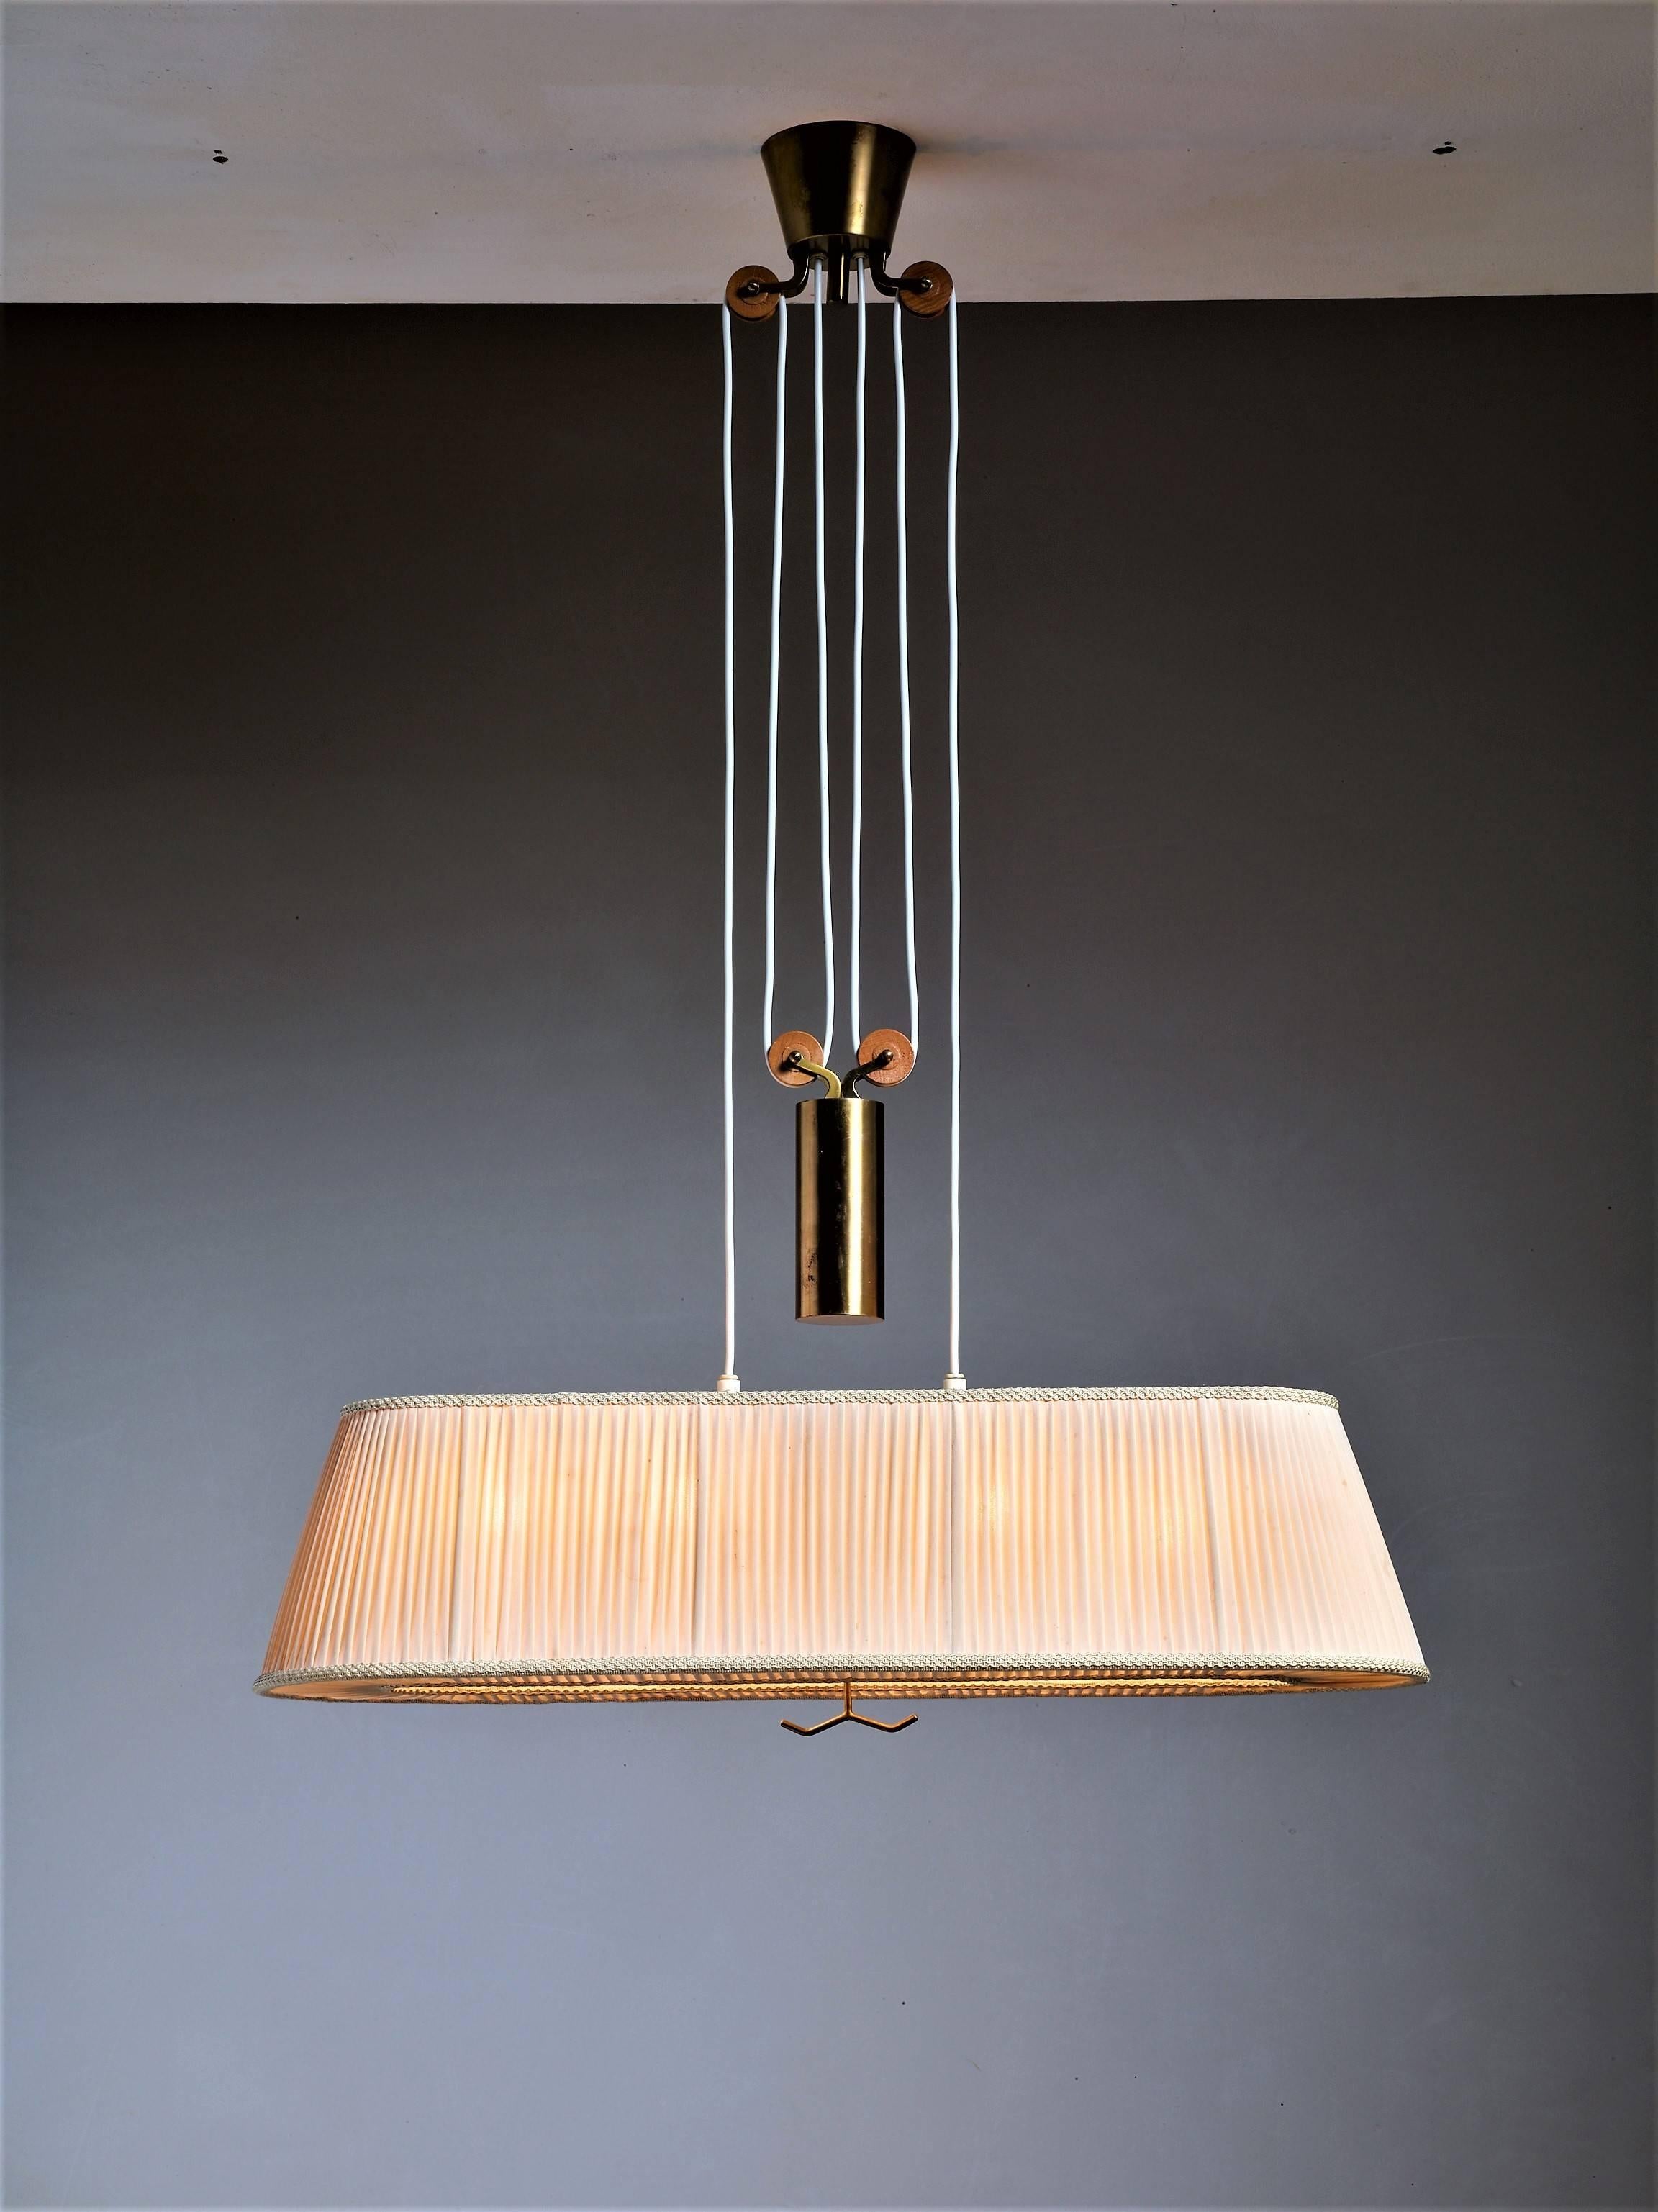 Scandinavian Modern Pendant with Pleated Fabric Shade and Brass Counterweight Andpleded Sweden, 1940